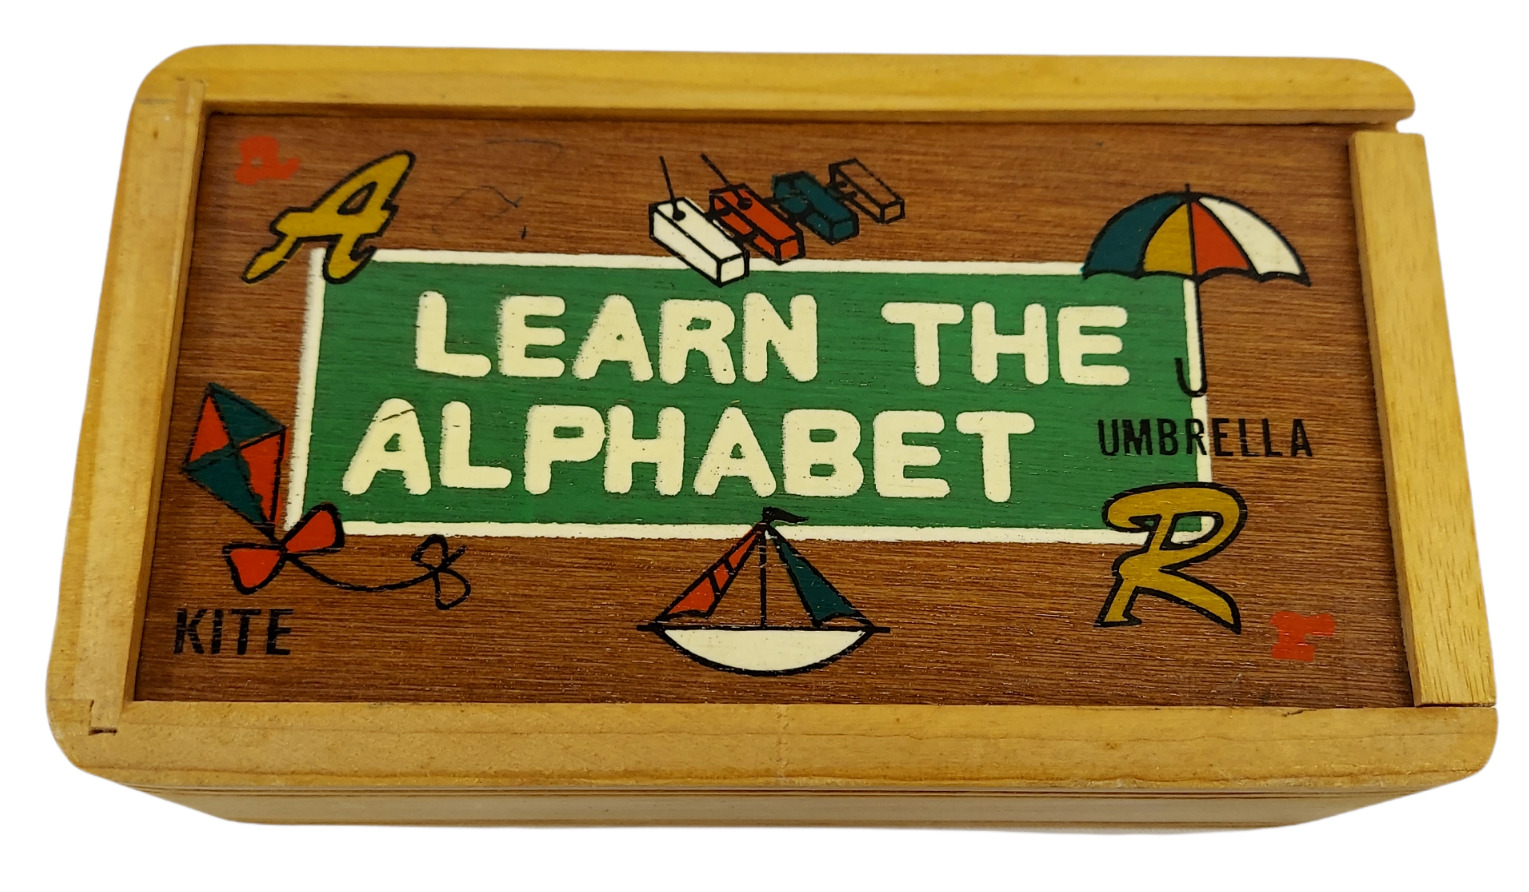 Vintage 1993 Tiny Tykes "learn The Alphabet" Wood Wooden Blocks With Wood Case